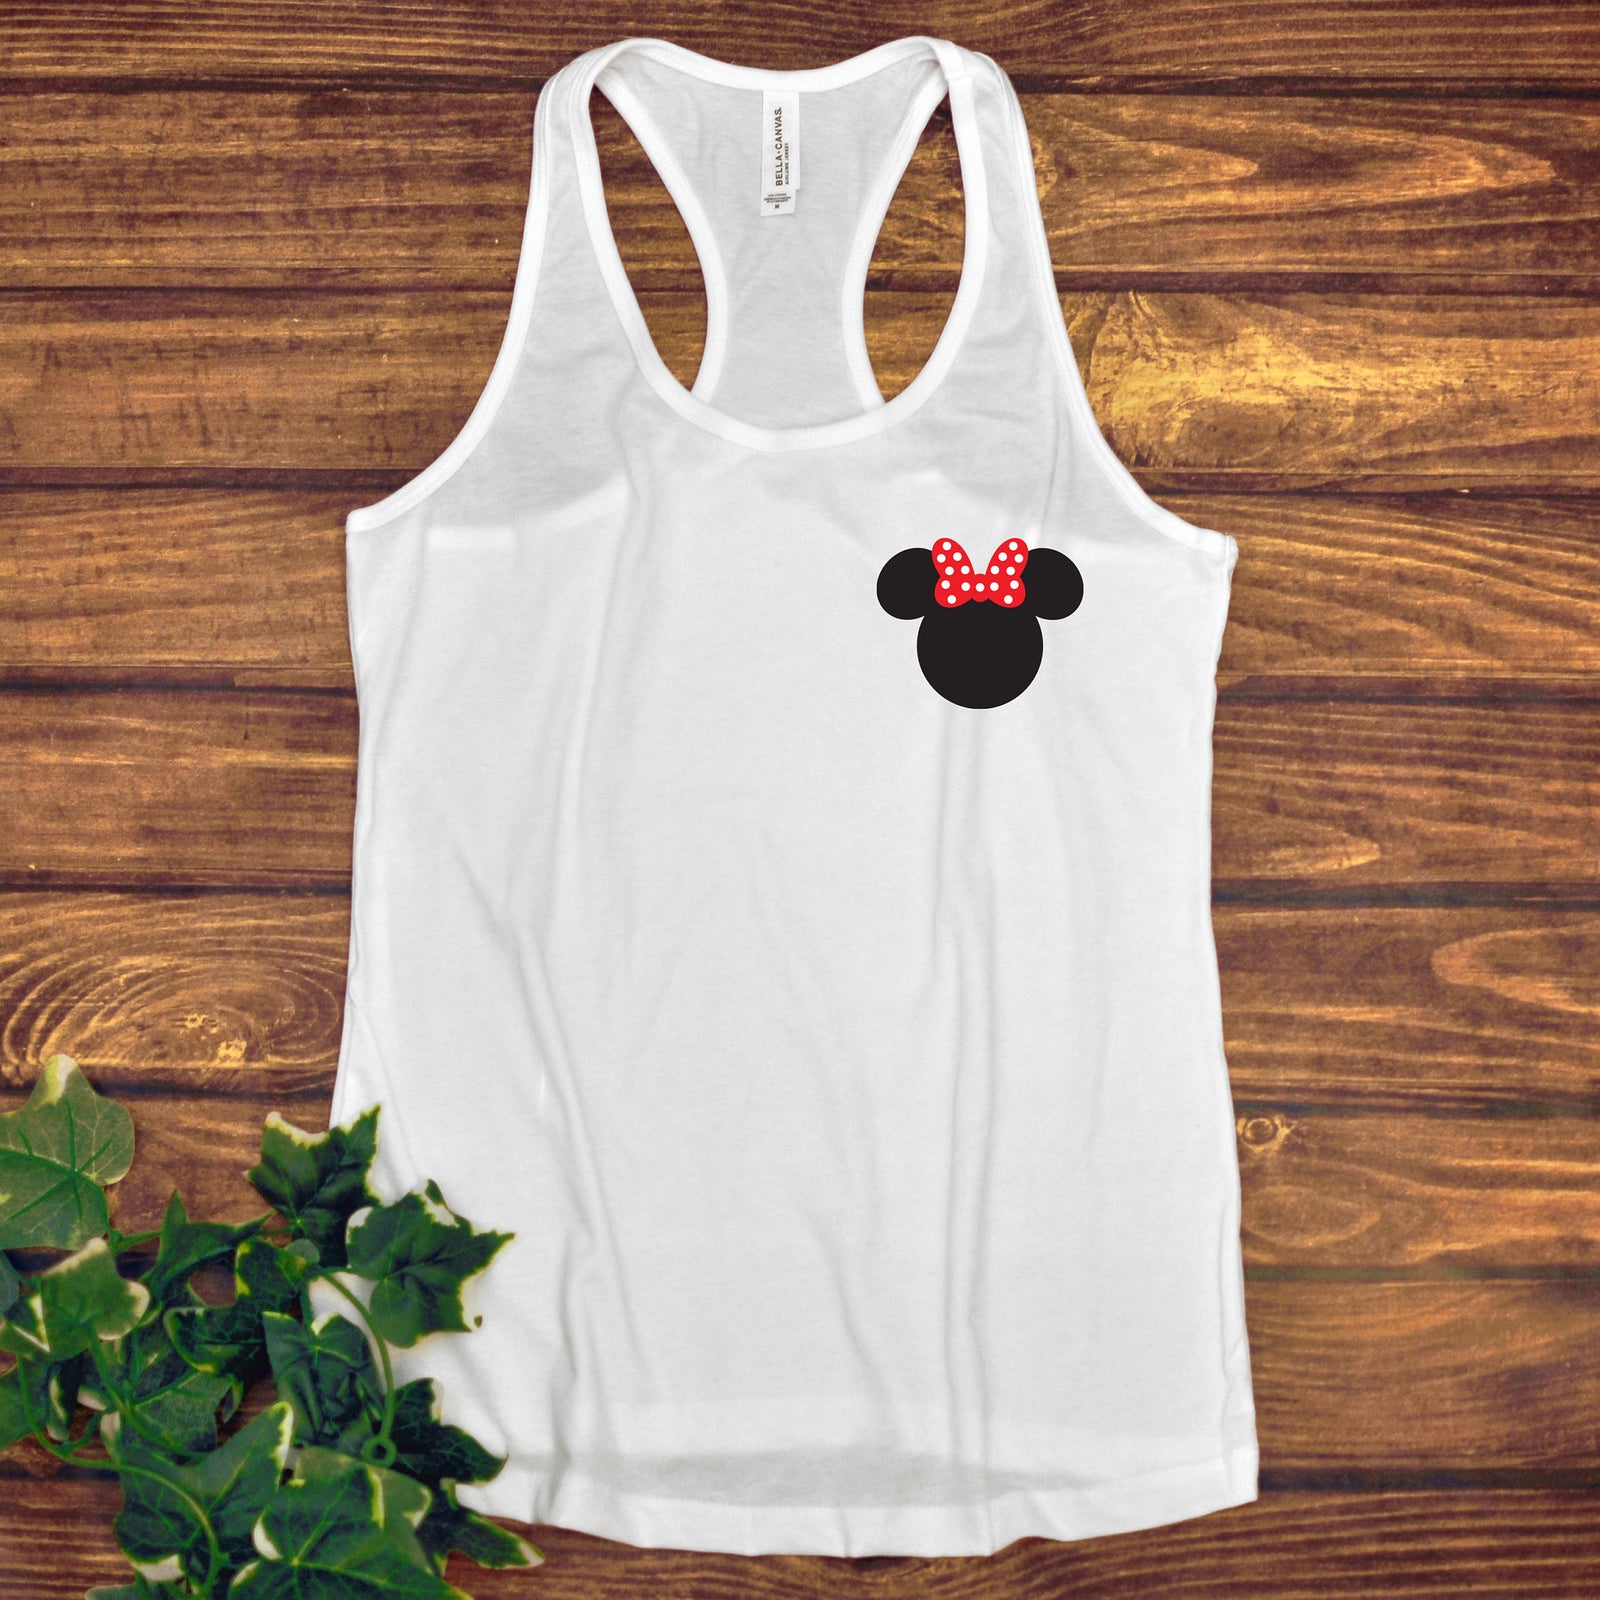 Pocket Size Minnie Mouse Ladies Racer Back Tank Top- Polka Dot Bow - Small Left Chest Logo